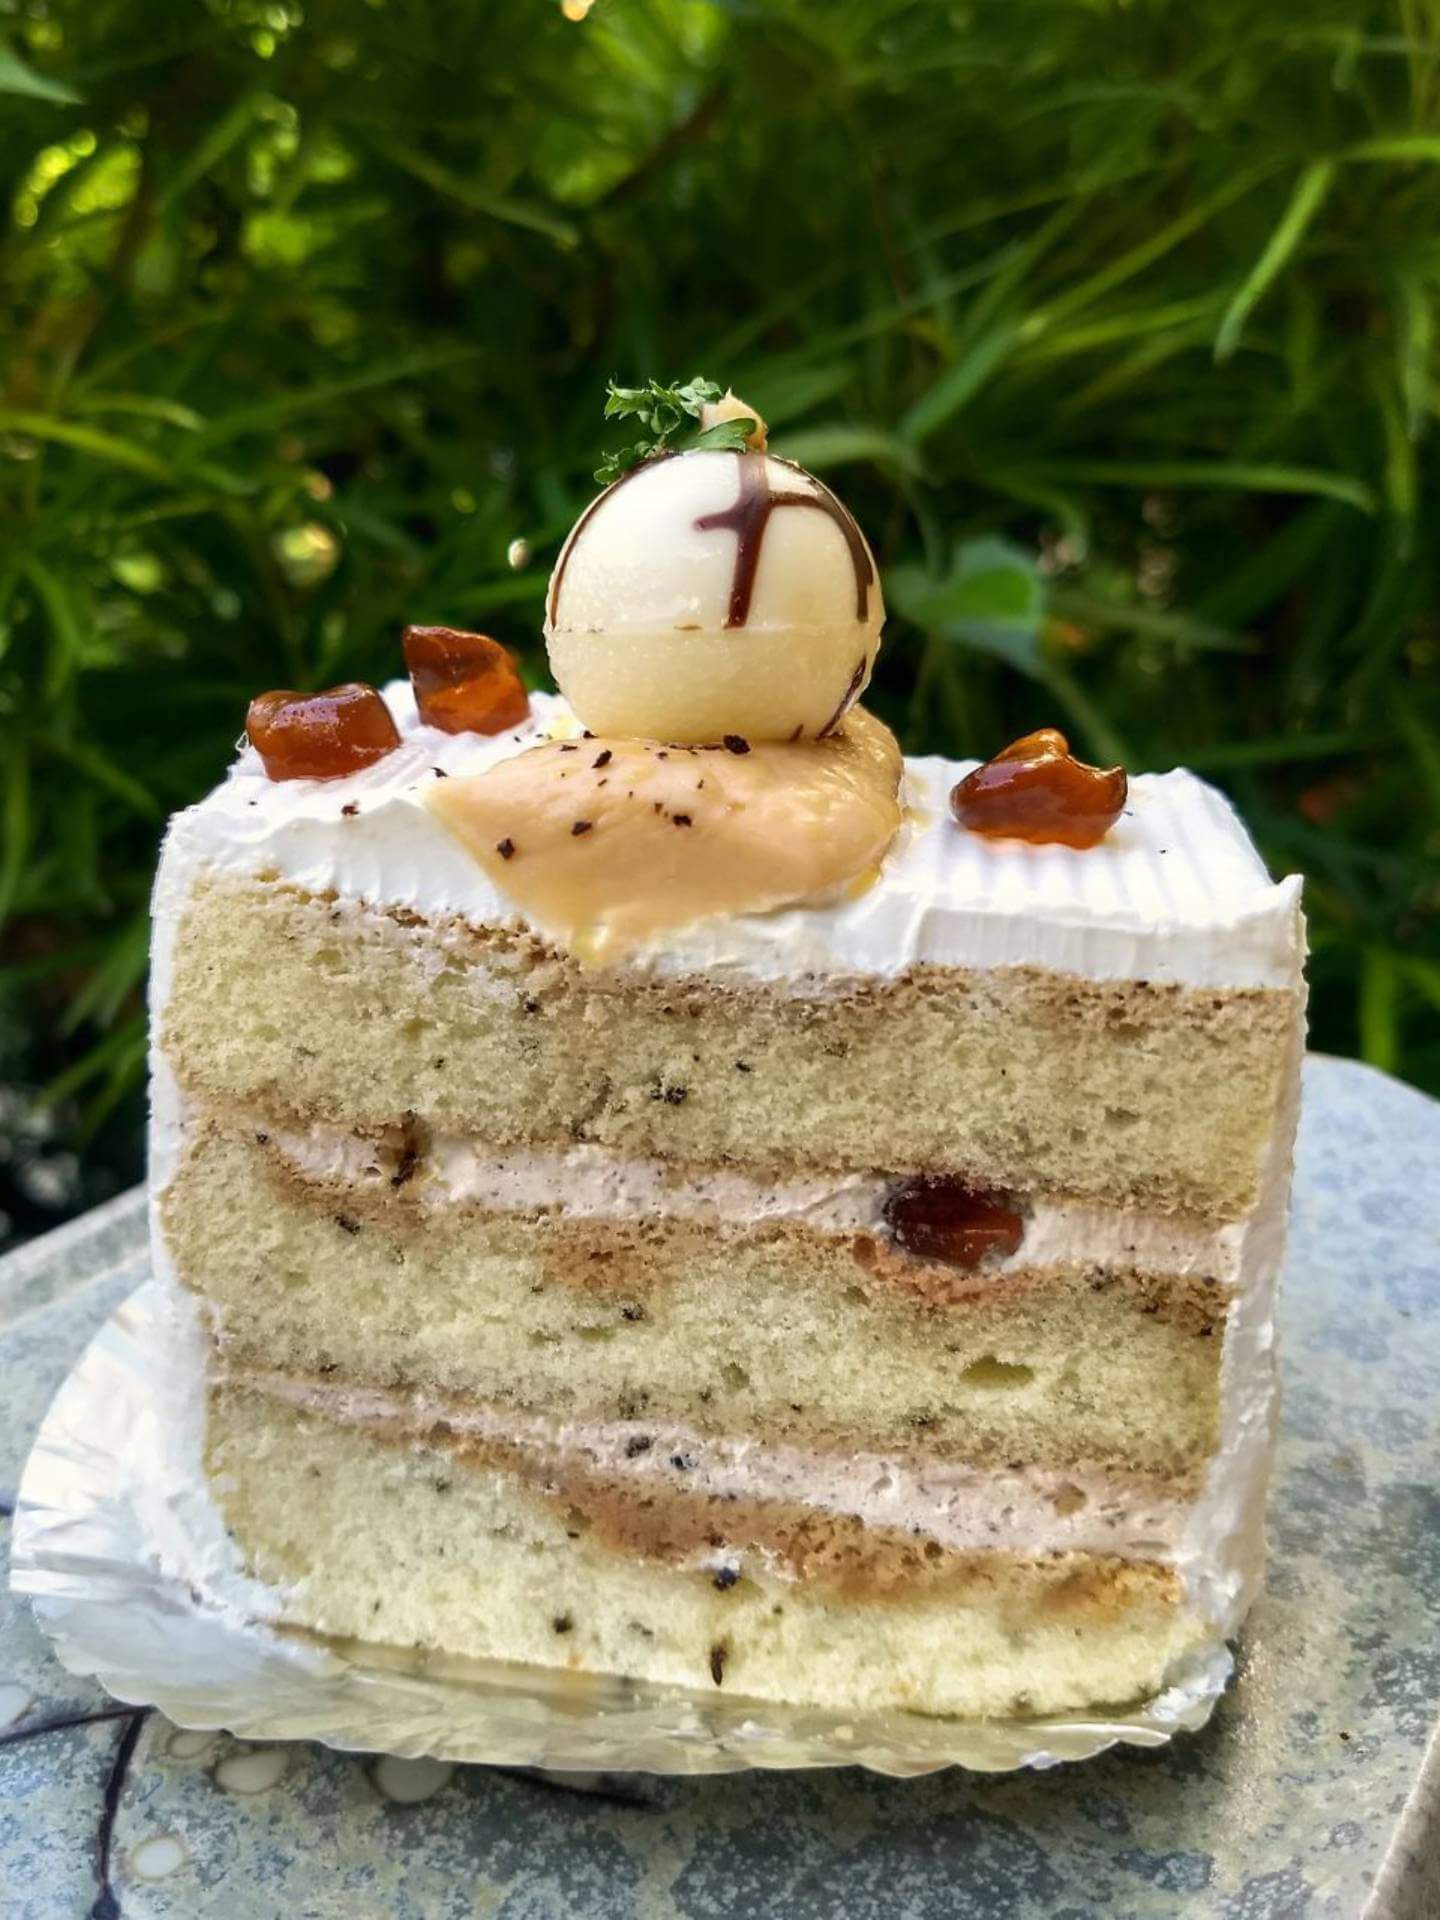 This Bakery Sells White Rabbit Cake Until 31 May &Amp; You Can Try It For Less Than Rm14! - World Of Buzz